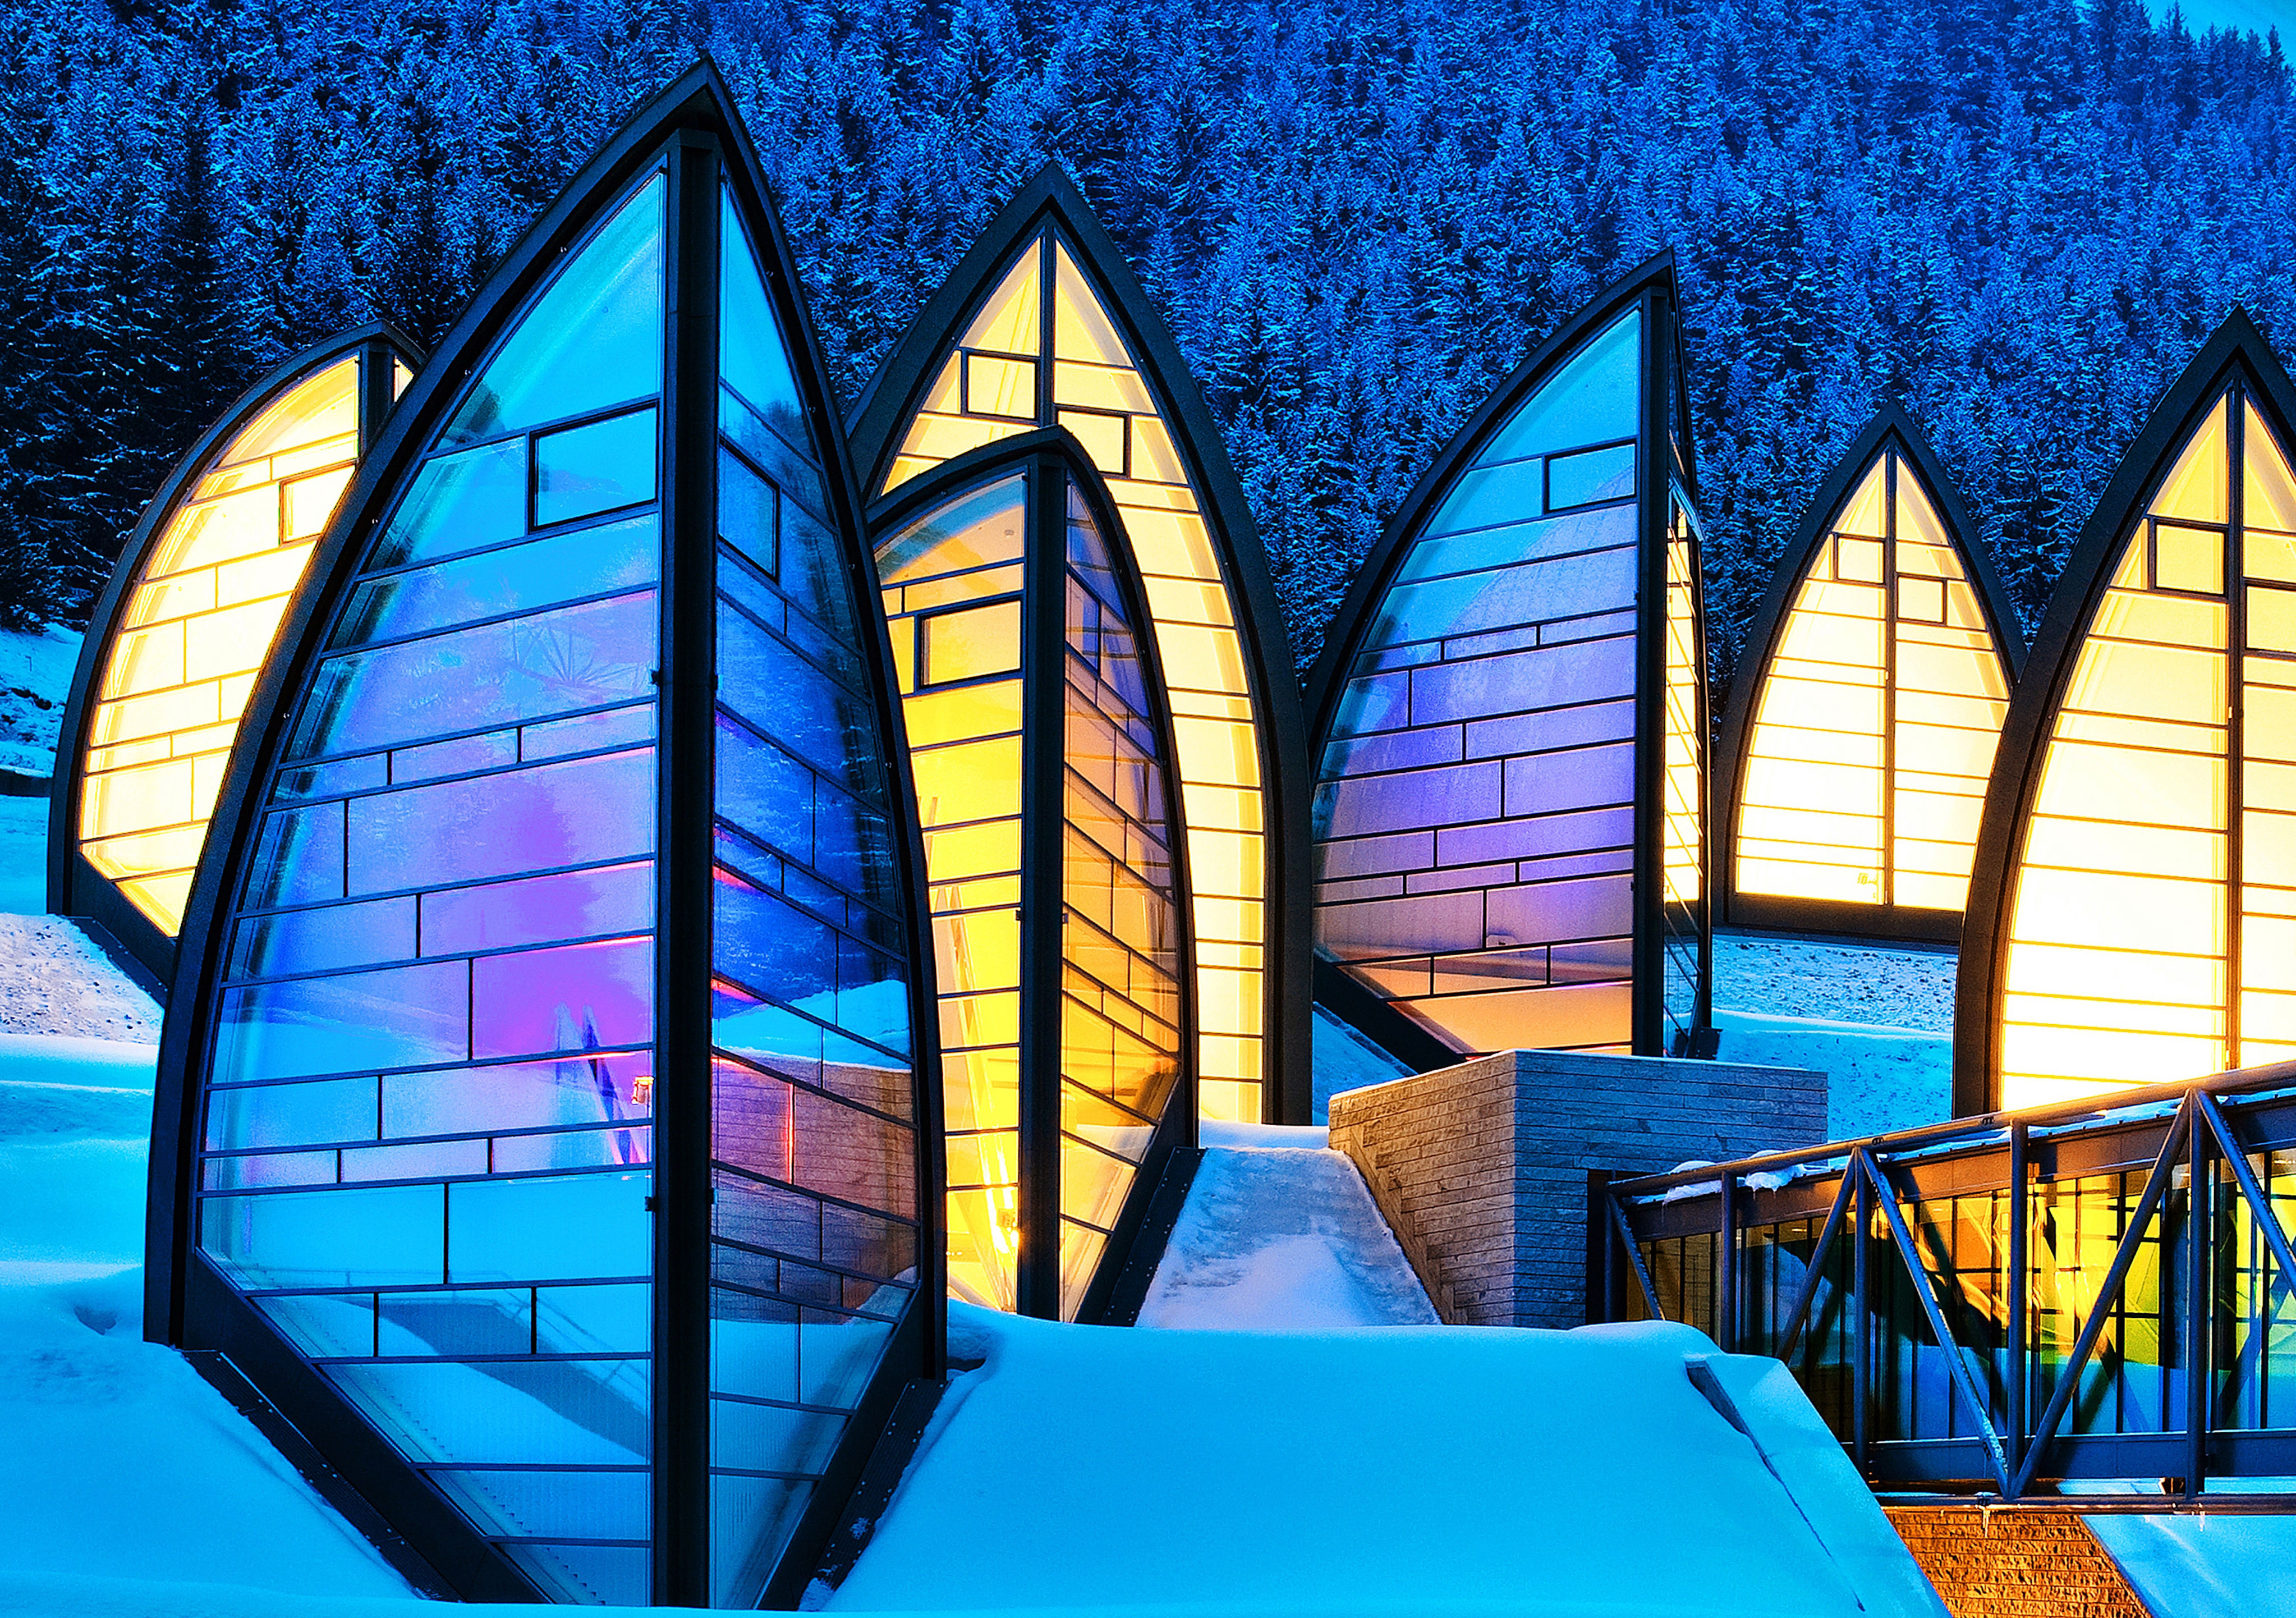 <p>Guests aboard the Tschuggen Express gondola en route to nearby skiing territory enjoy a close-up view of <a href="https://tschuggencollection.ch/en/hotel/tschuggen-grand-hotel">the mountainside retreat</a>’s glass and steel “sails,” which soar up to 60 feet tall and flood the Mario Botta–designed spa below with sunshine. (At night, soft yellows and blues set the nine sculptural skylights aglow from within.) The 54,000-square-foot wellness facility known as the Tschuggen Bergoase Spa features whirlpools, a sauna, a stone grotto, and a Kneipp course. It also boasts a medical wellness center, which offers ozone therapy, nutrition counseling, and laser treatments.</p> <div class="callout"><p><a href="https://www.expedia.com/Arosa-Hotels-Tschuggen-Grand-Hotel.h530274.Hotel-Information" title="Book now at Expedia.com">Book now at Expedia.com</a></p> </div><p>Sign up for our newsletter to get the latest in design, decorating, celebrity style, shopping, and more.</p><a href="https://www.architecturaldigest.com/newsletter/subscribe?sourceCode=msnsend">Sign Up Now</a>